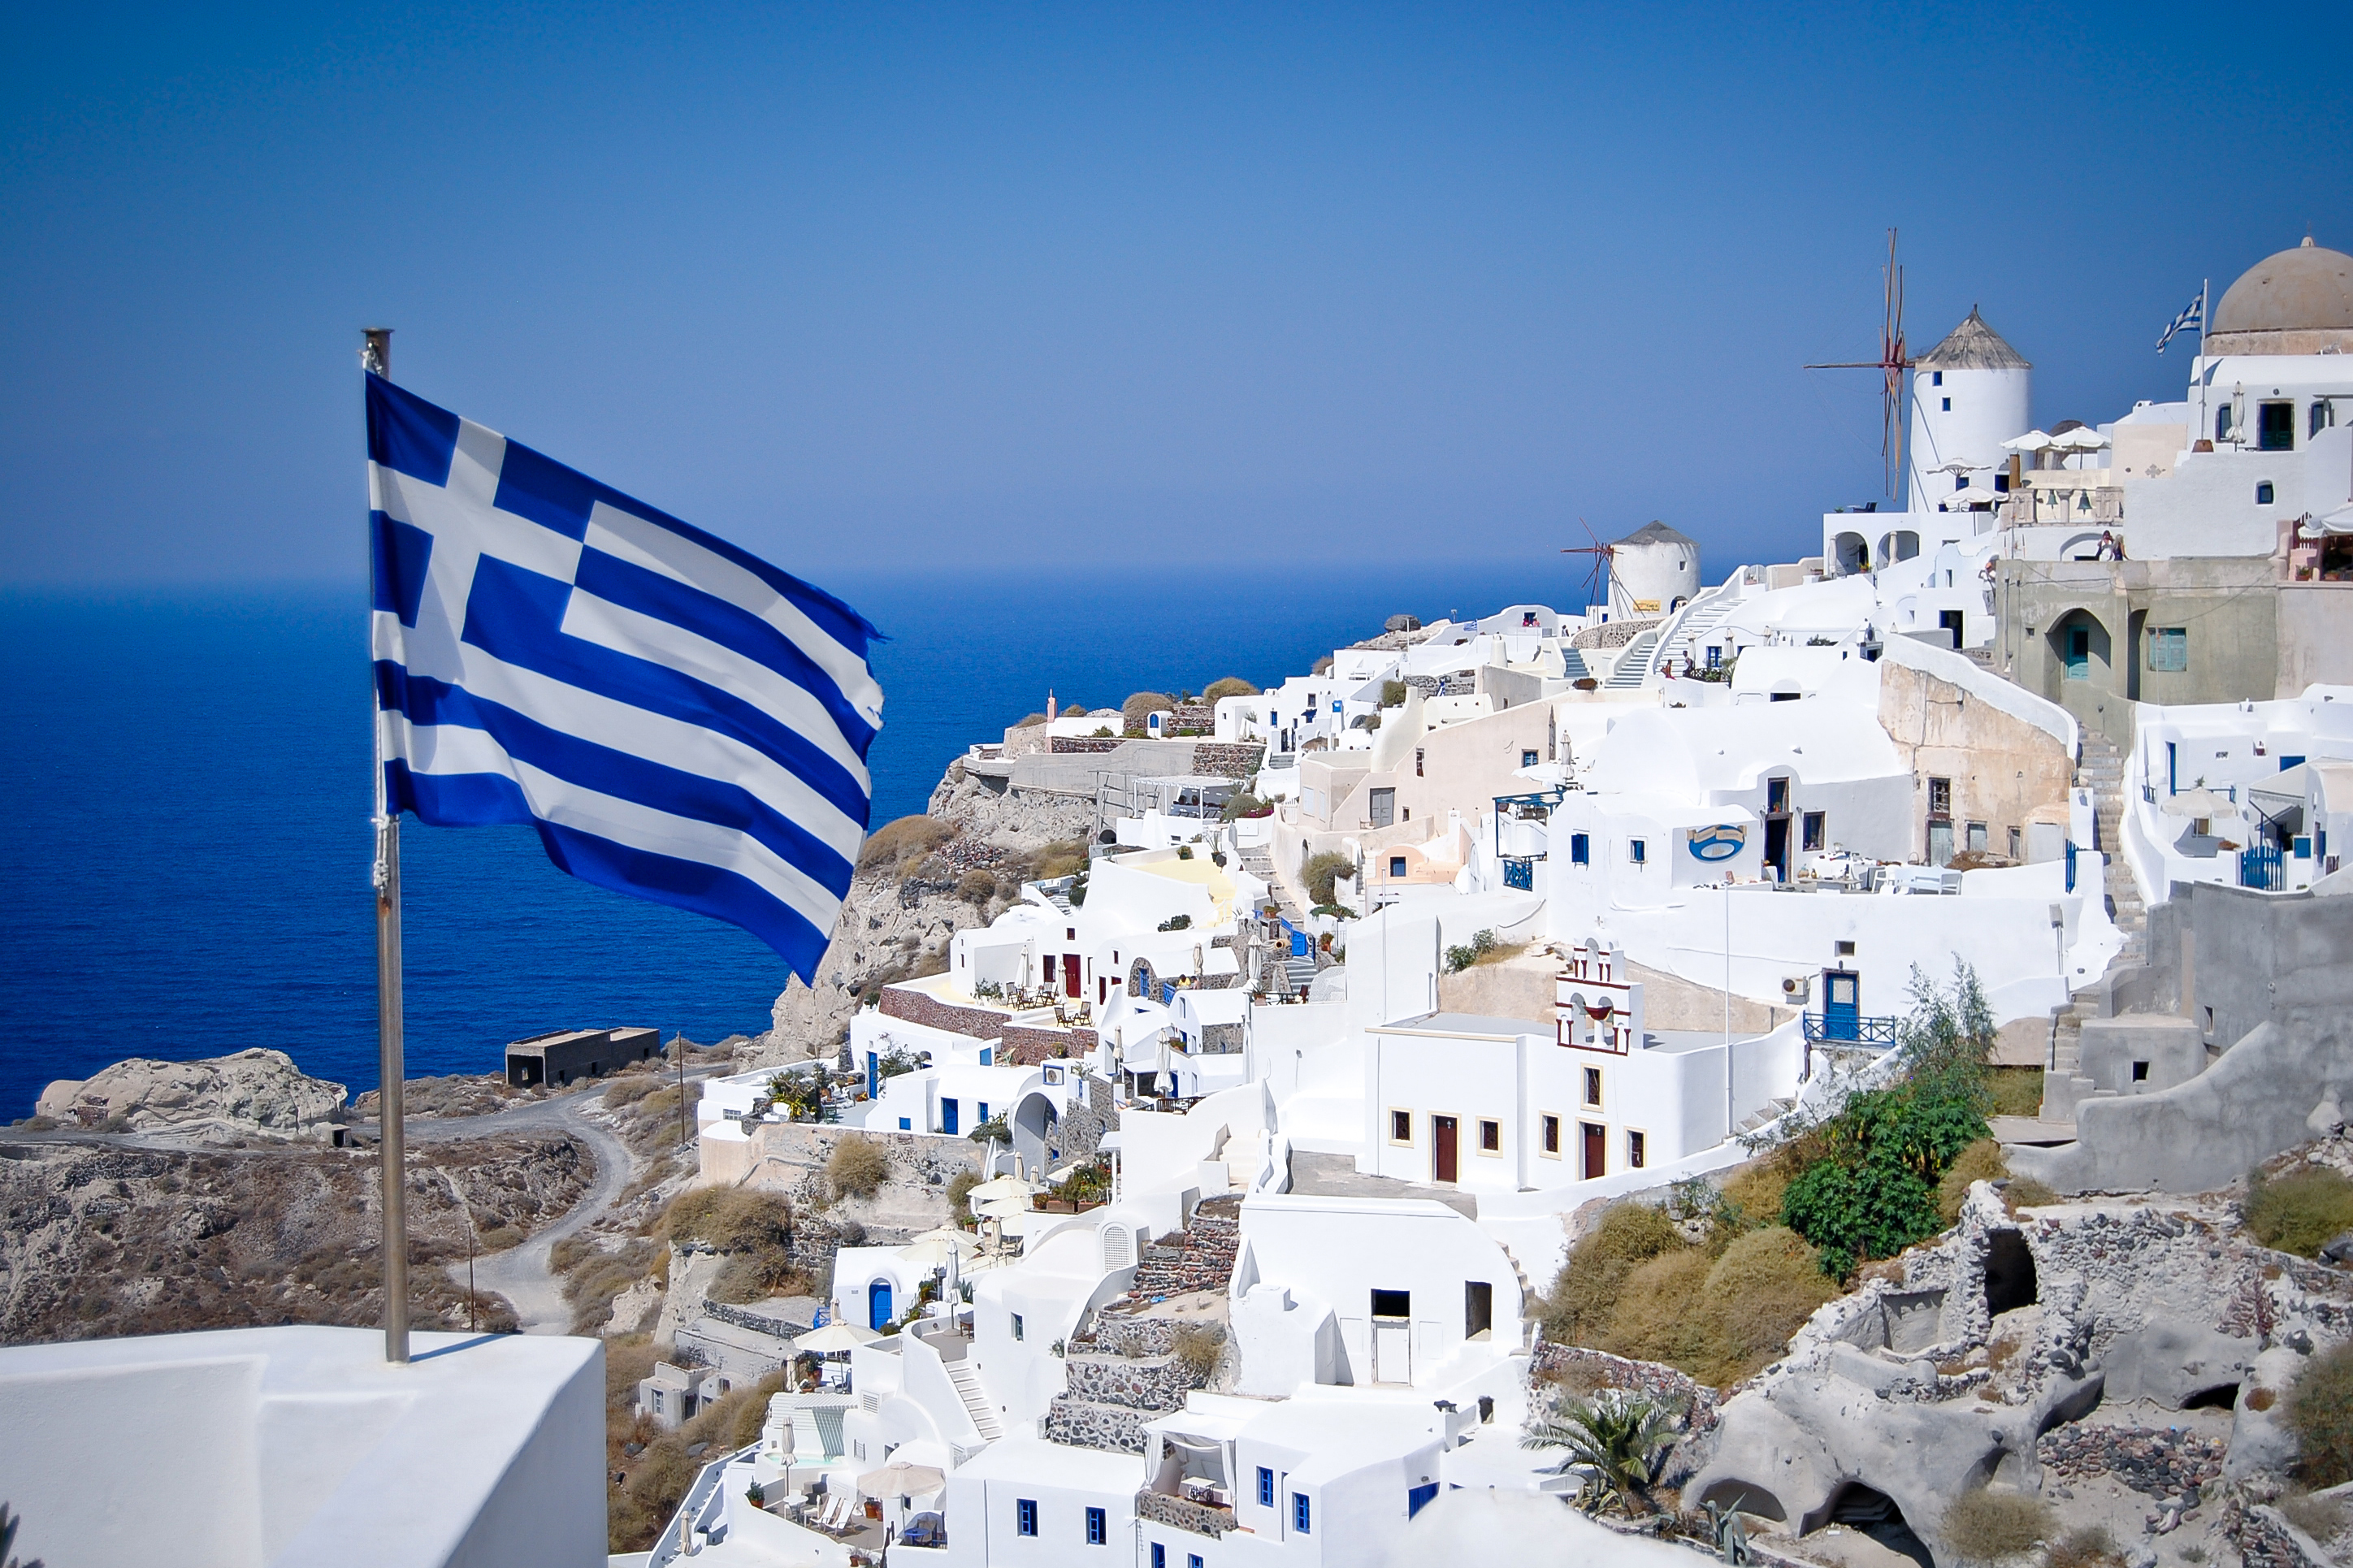 The Greek flag on the background of the coast symbolizes the Greek residence permit for investment